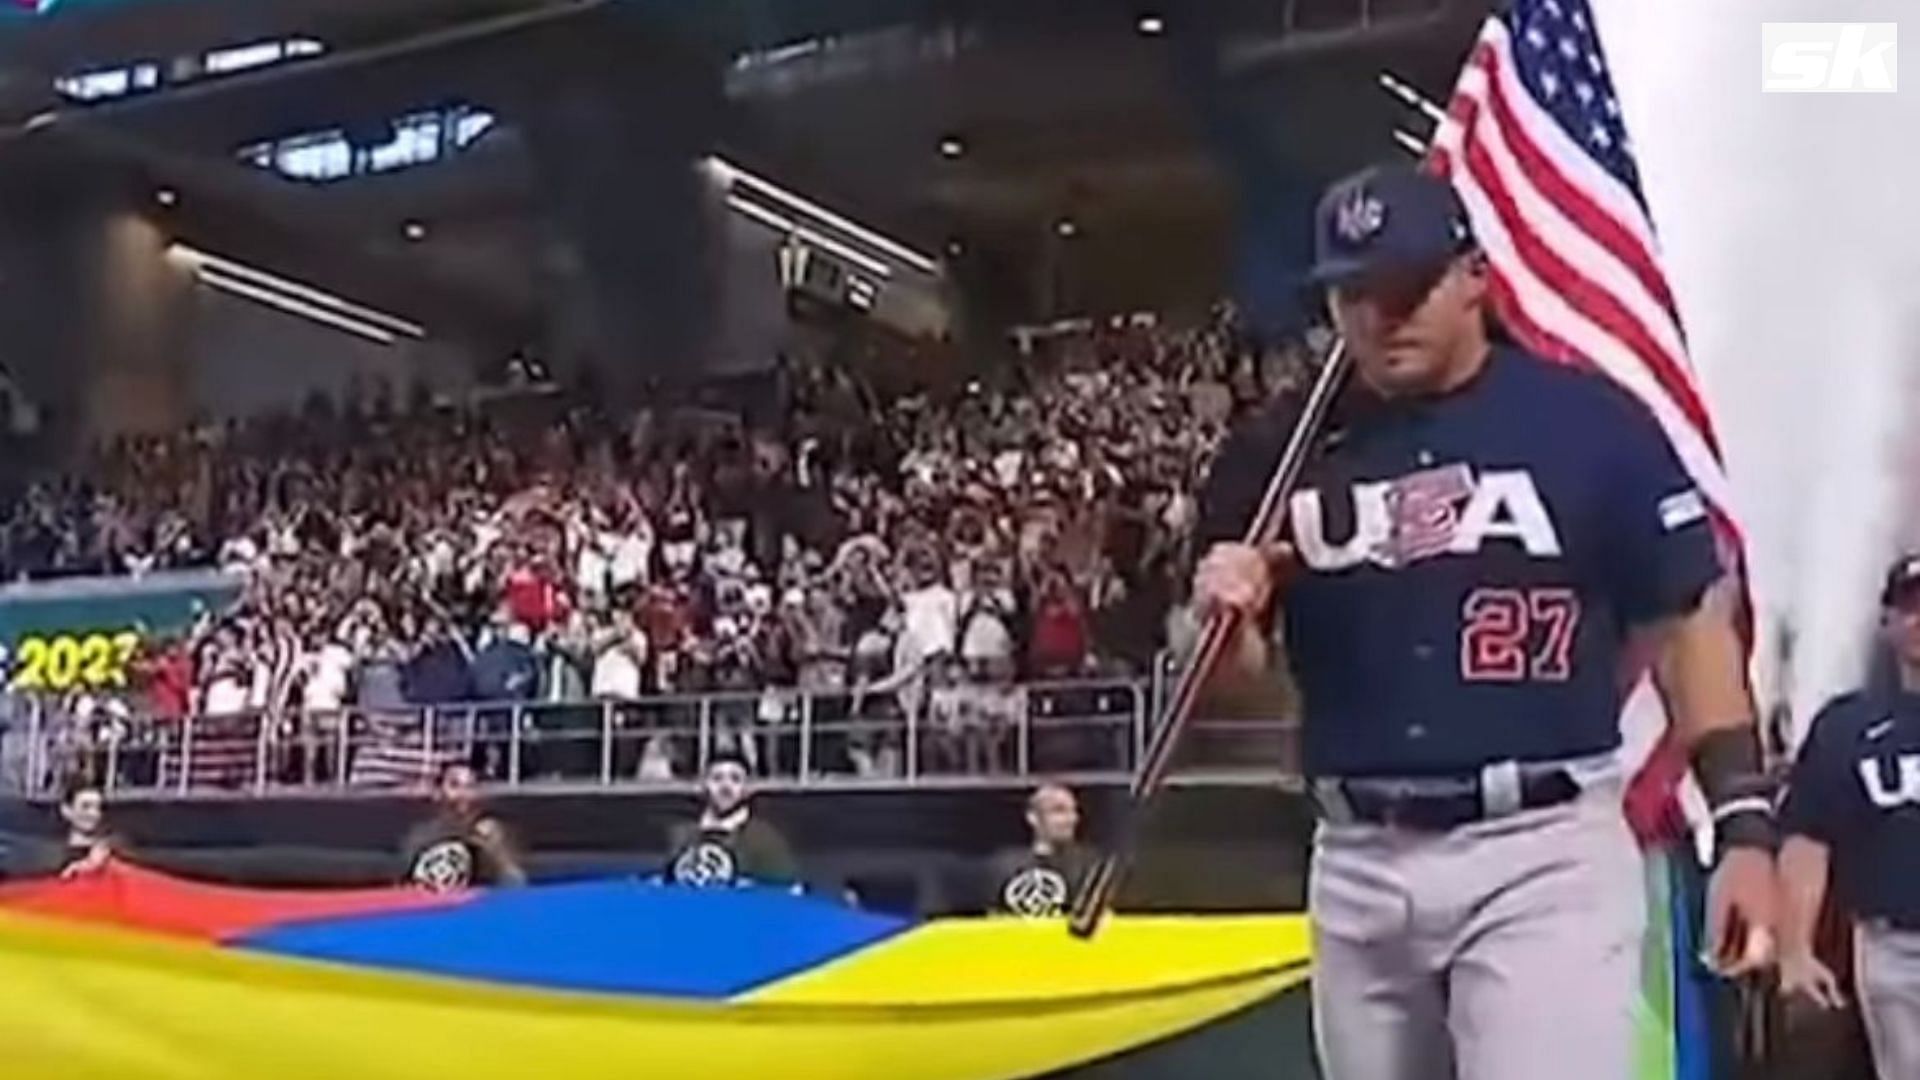 Mike Trout was seen leading Team USA onto the field.